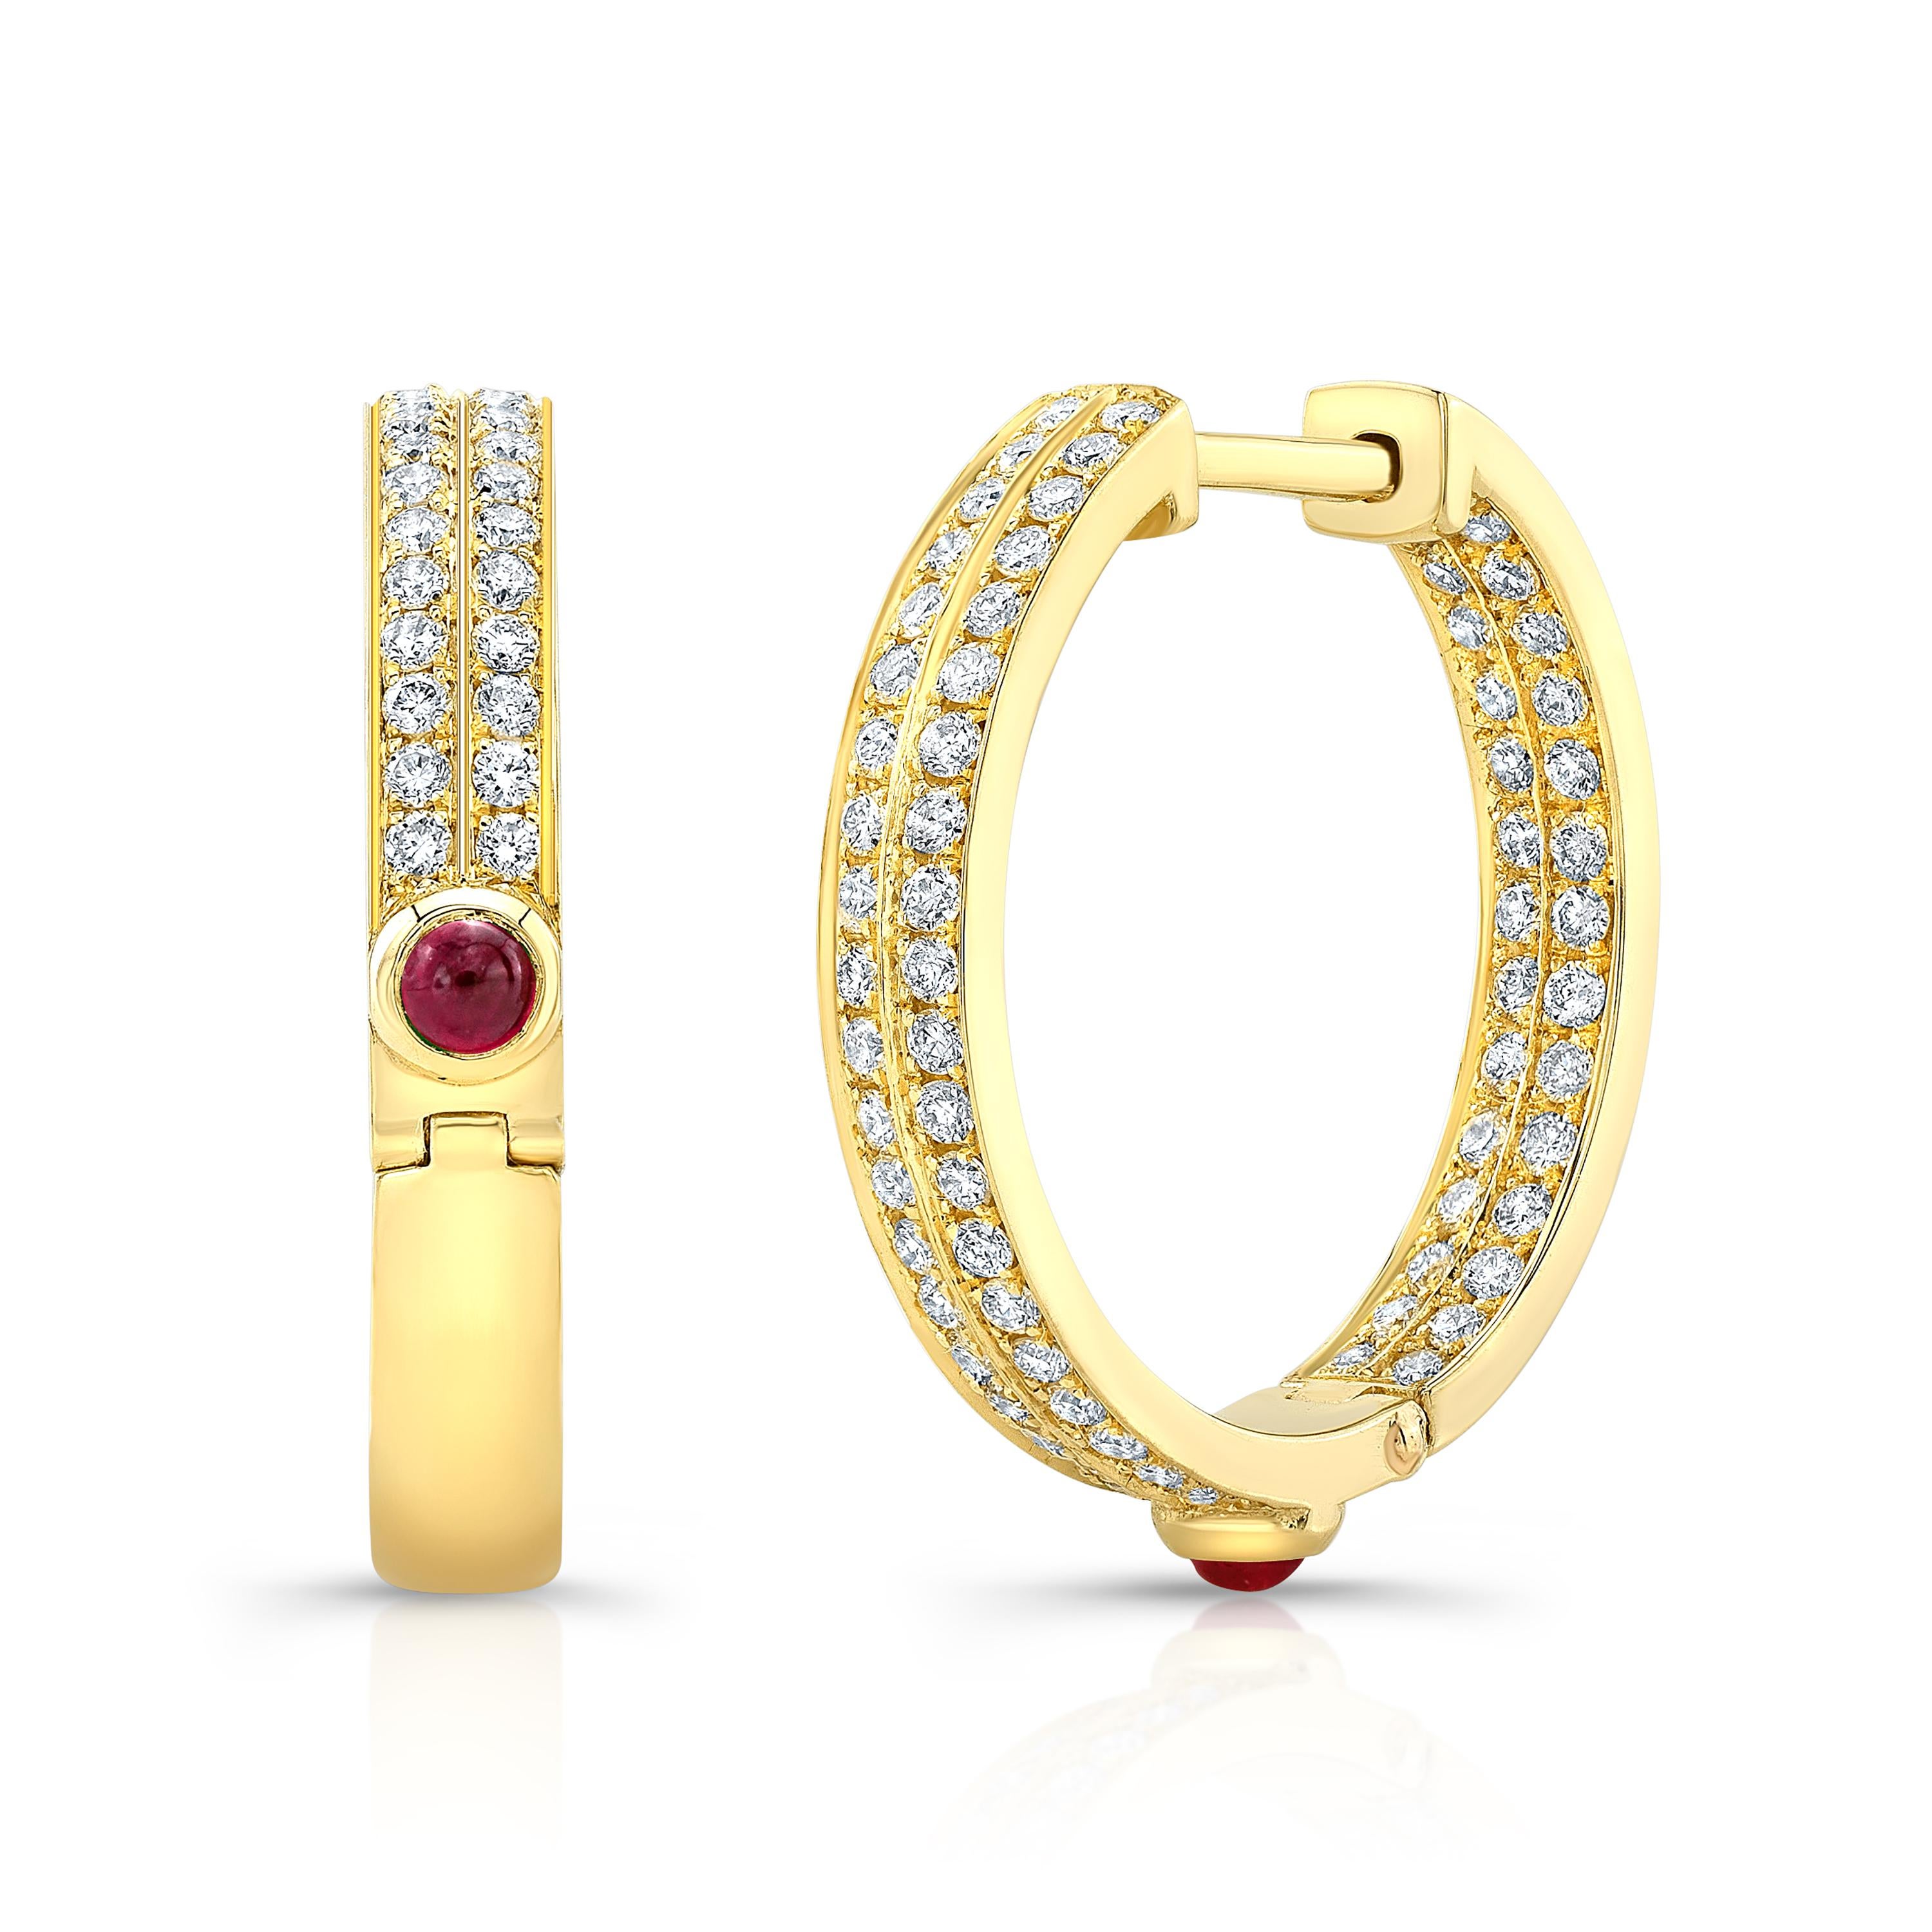 Contemporary 18 Karat Gold, Diamond, Sapphire, Ruby and Emerald Small Architect Hoop Earring